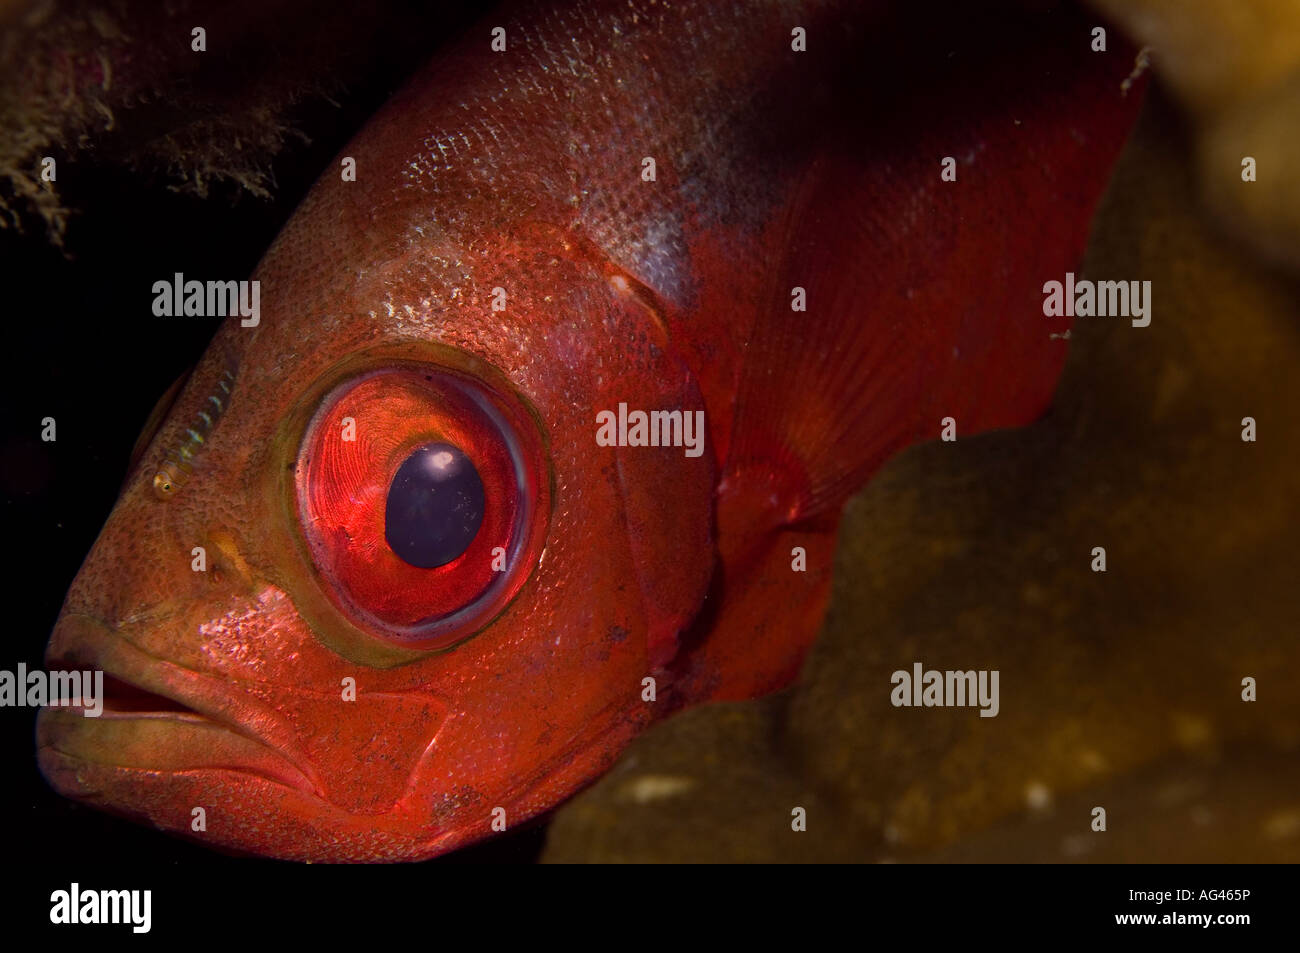 A Glass Eye Snapper or Big Eye Heteropriacanthus cruentatus with Cleaner Goby in Cocos Island, Costa Rica. Stock Photo